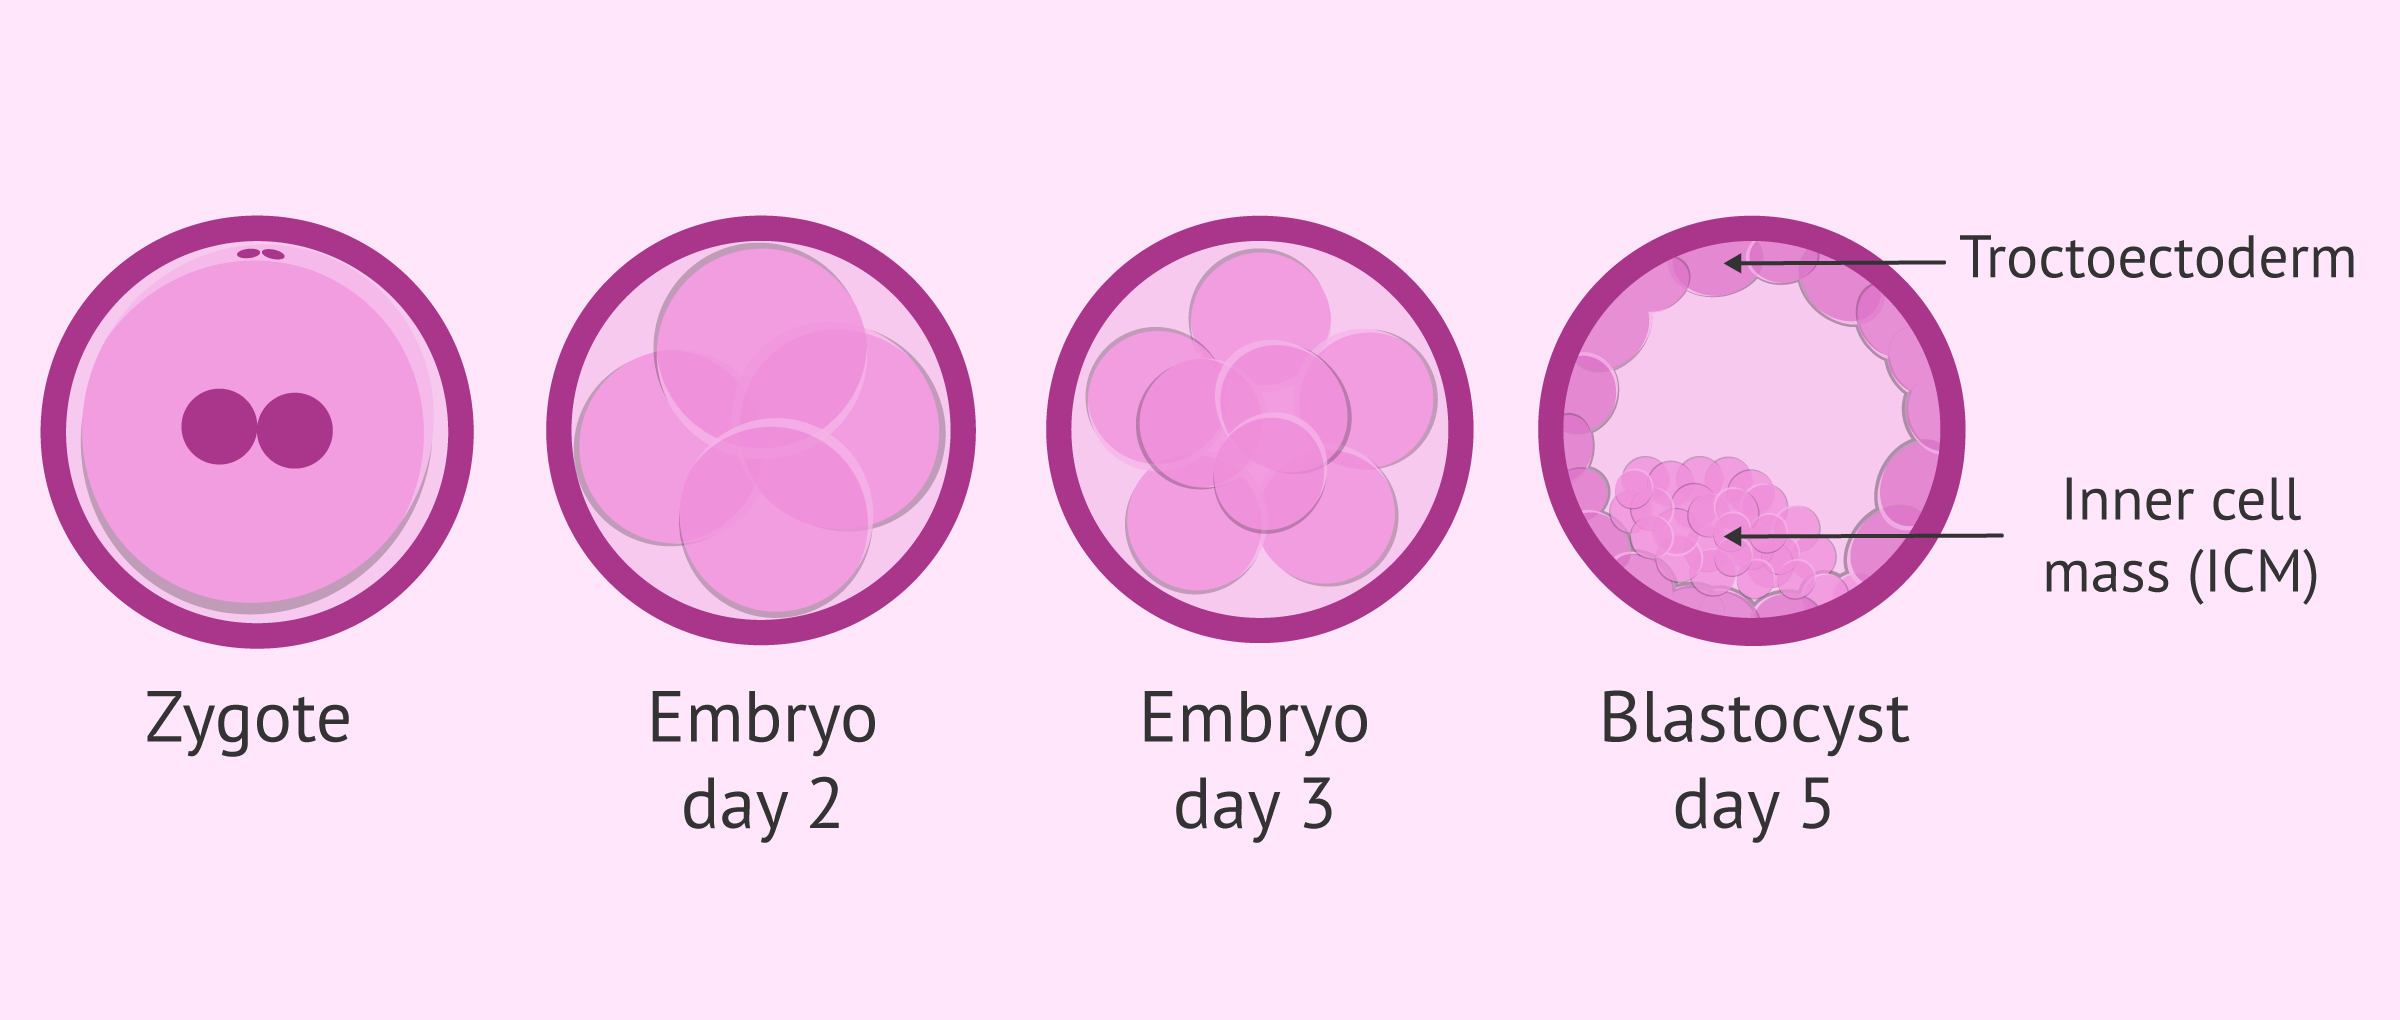 What is embryonic development like?